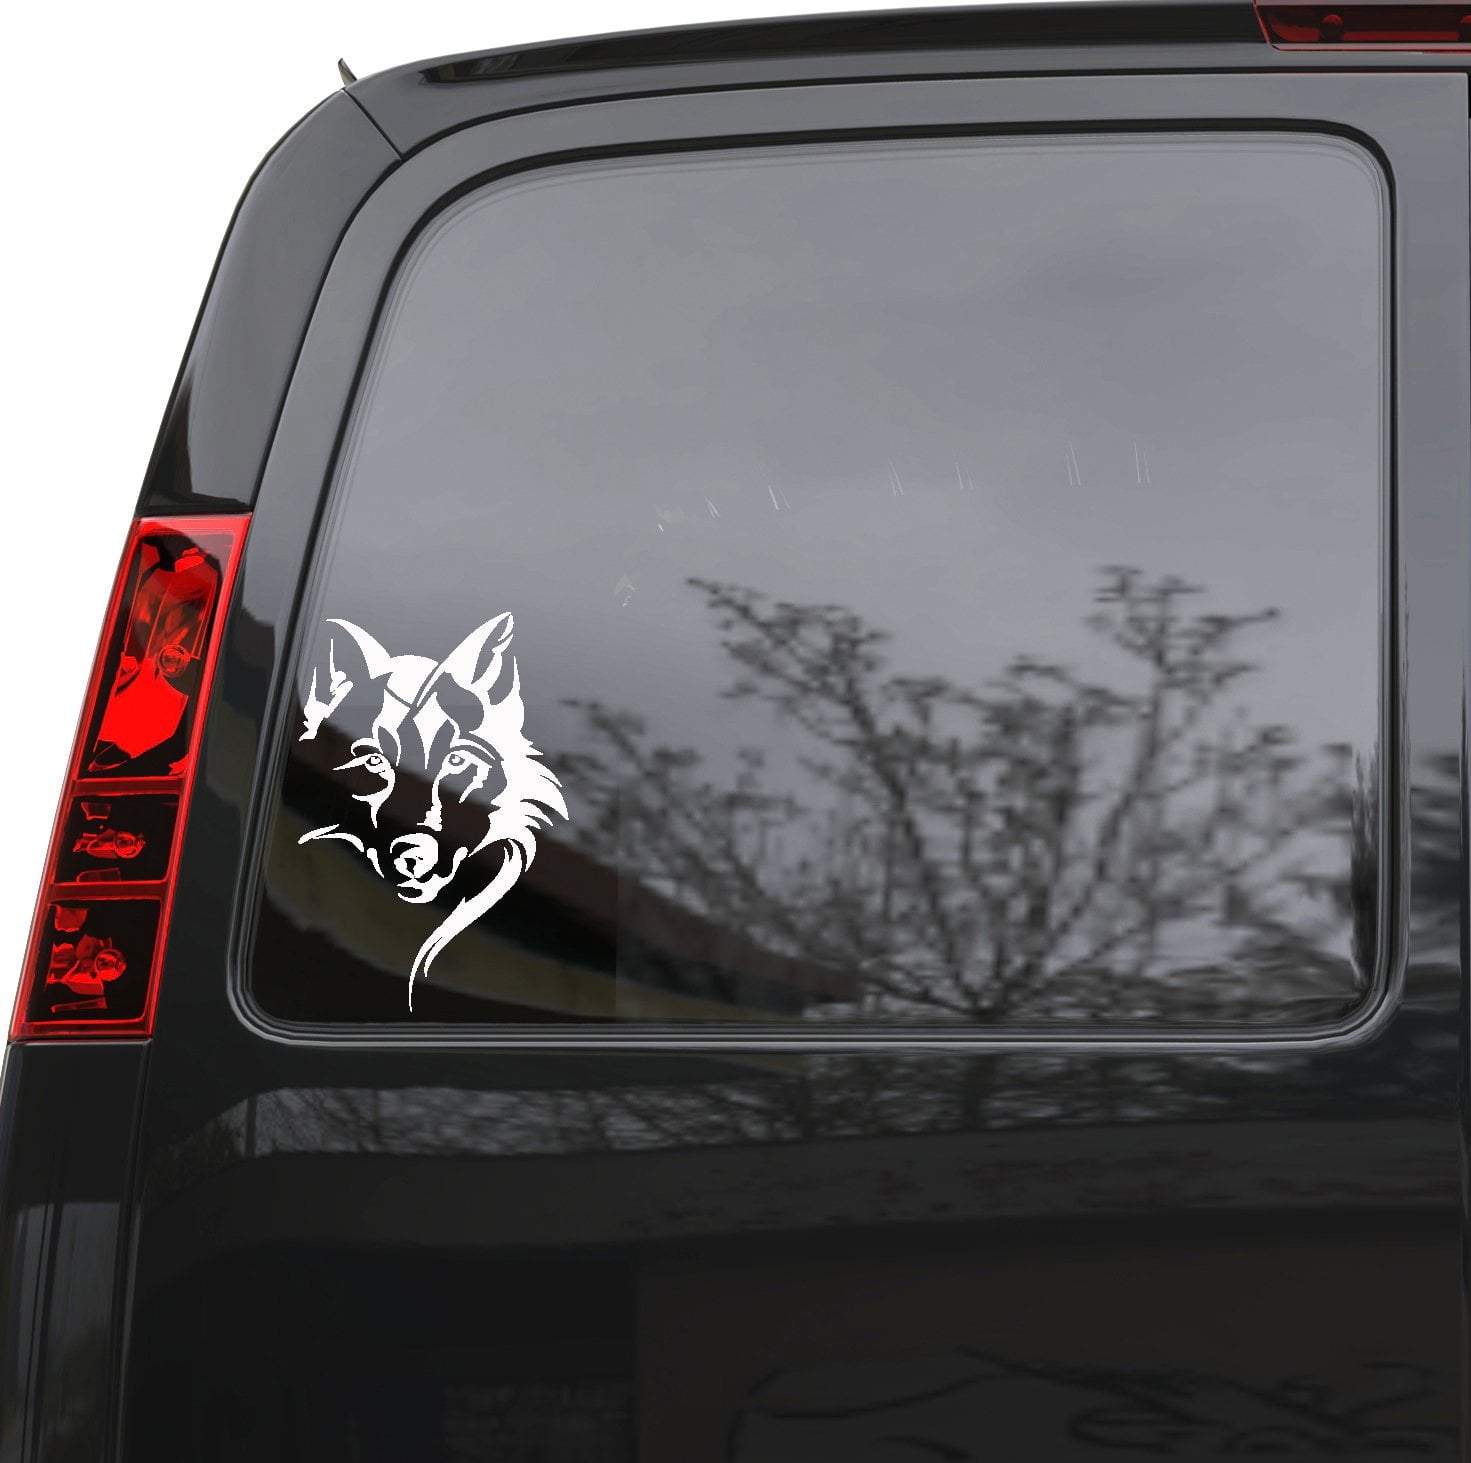 Grey Goose Logo - 5 Inch Sticker Graphic - Auto Wall Laptop Cell phone  Bumper Window Decal Sticker